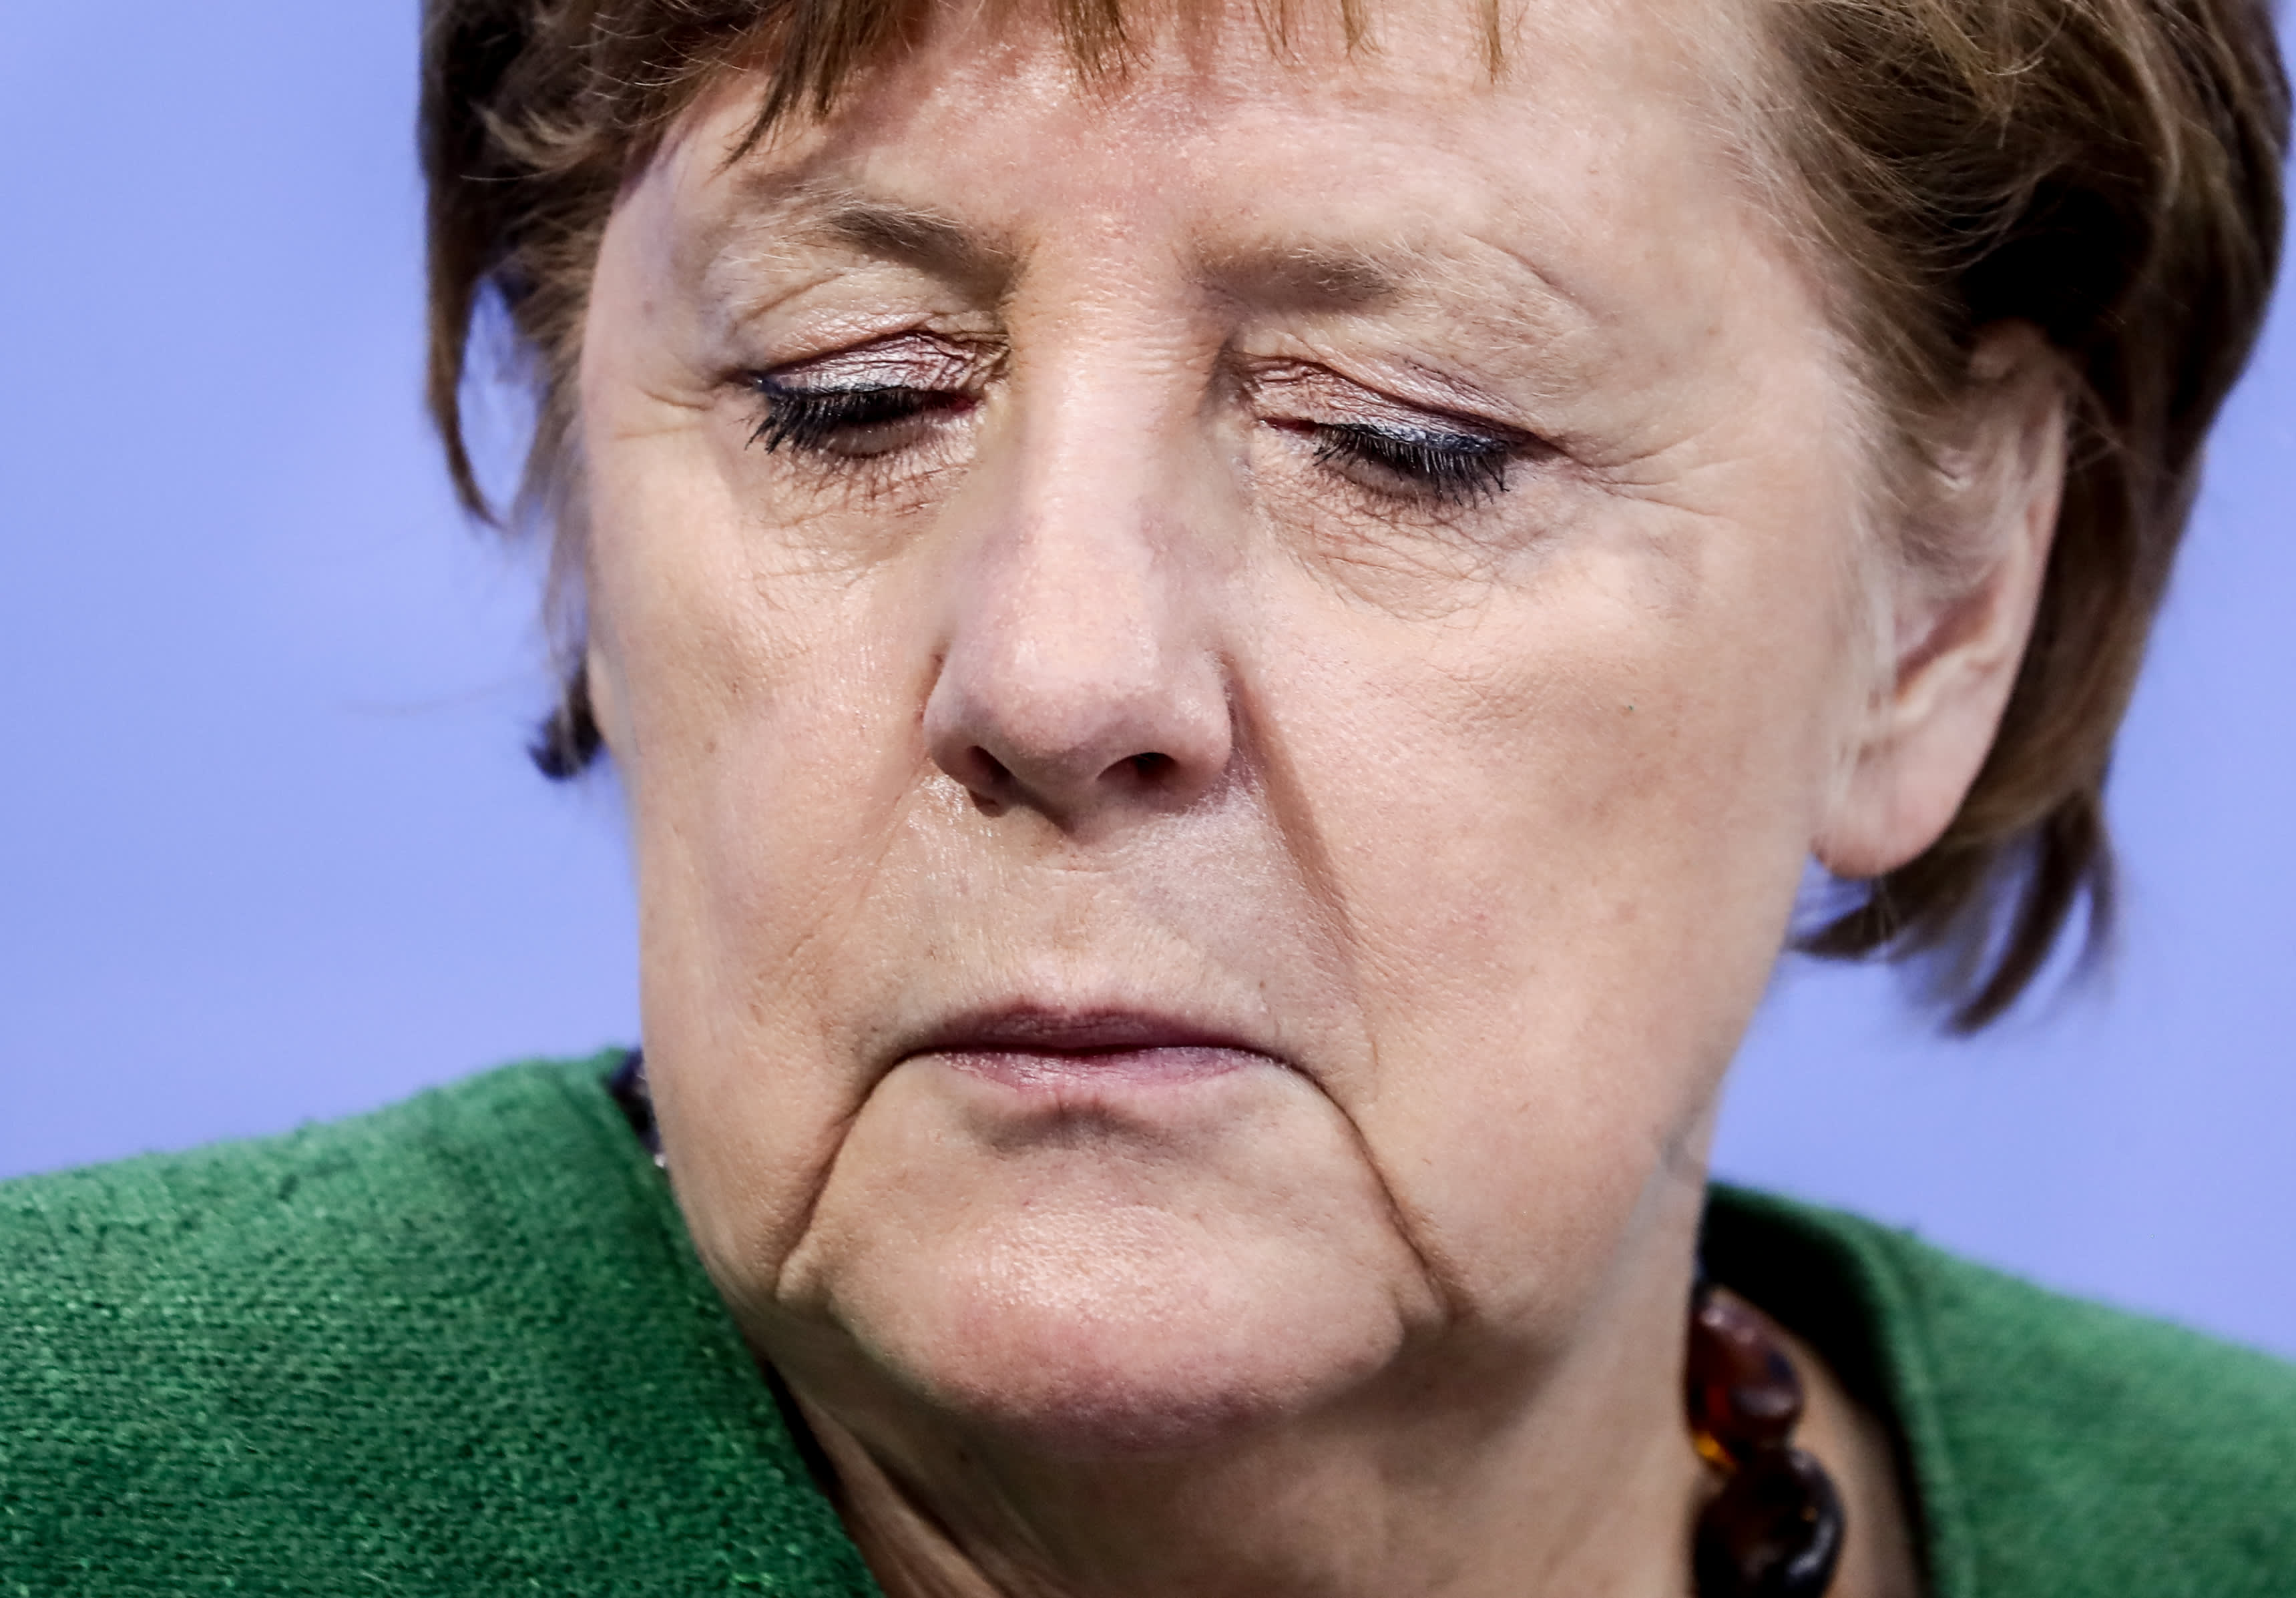 The popularity of Germany’s Merkel and CDU / CSU falls during the pandemic